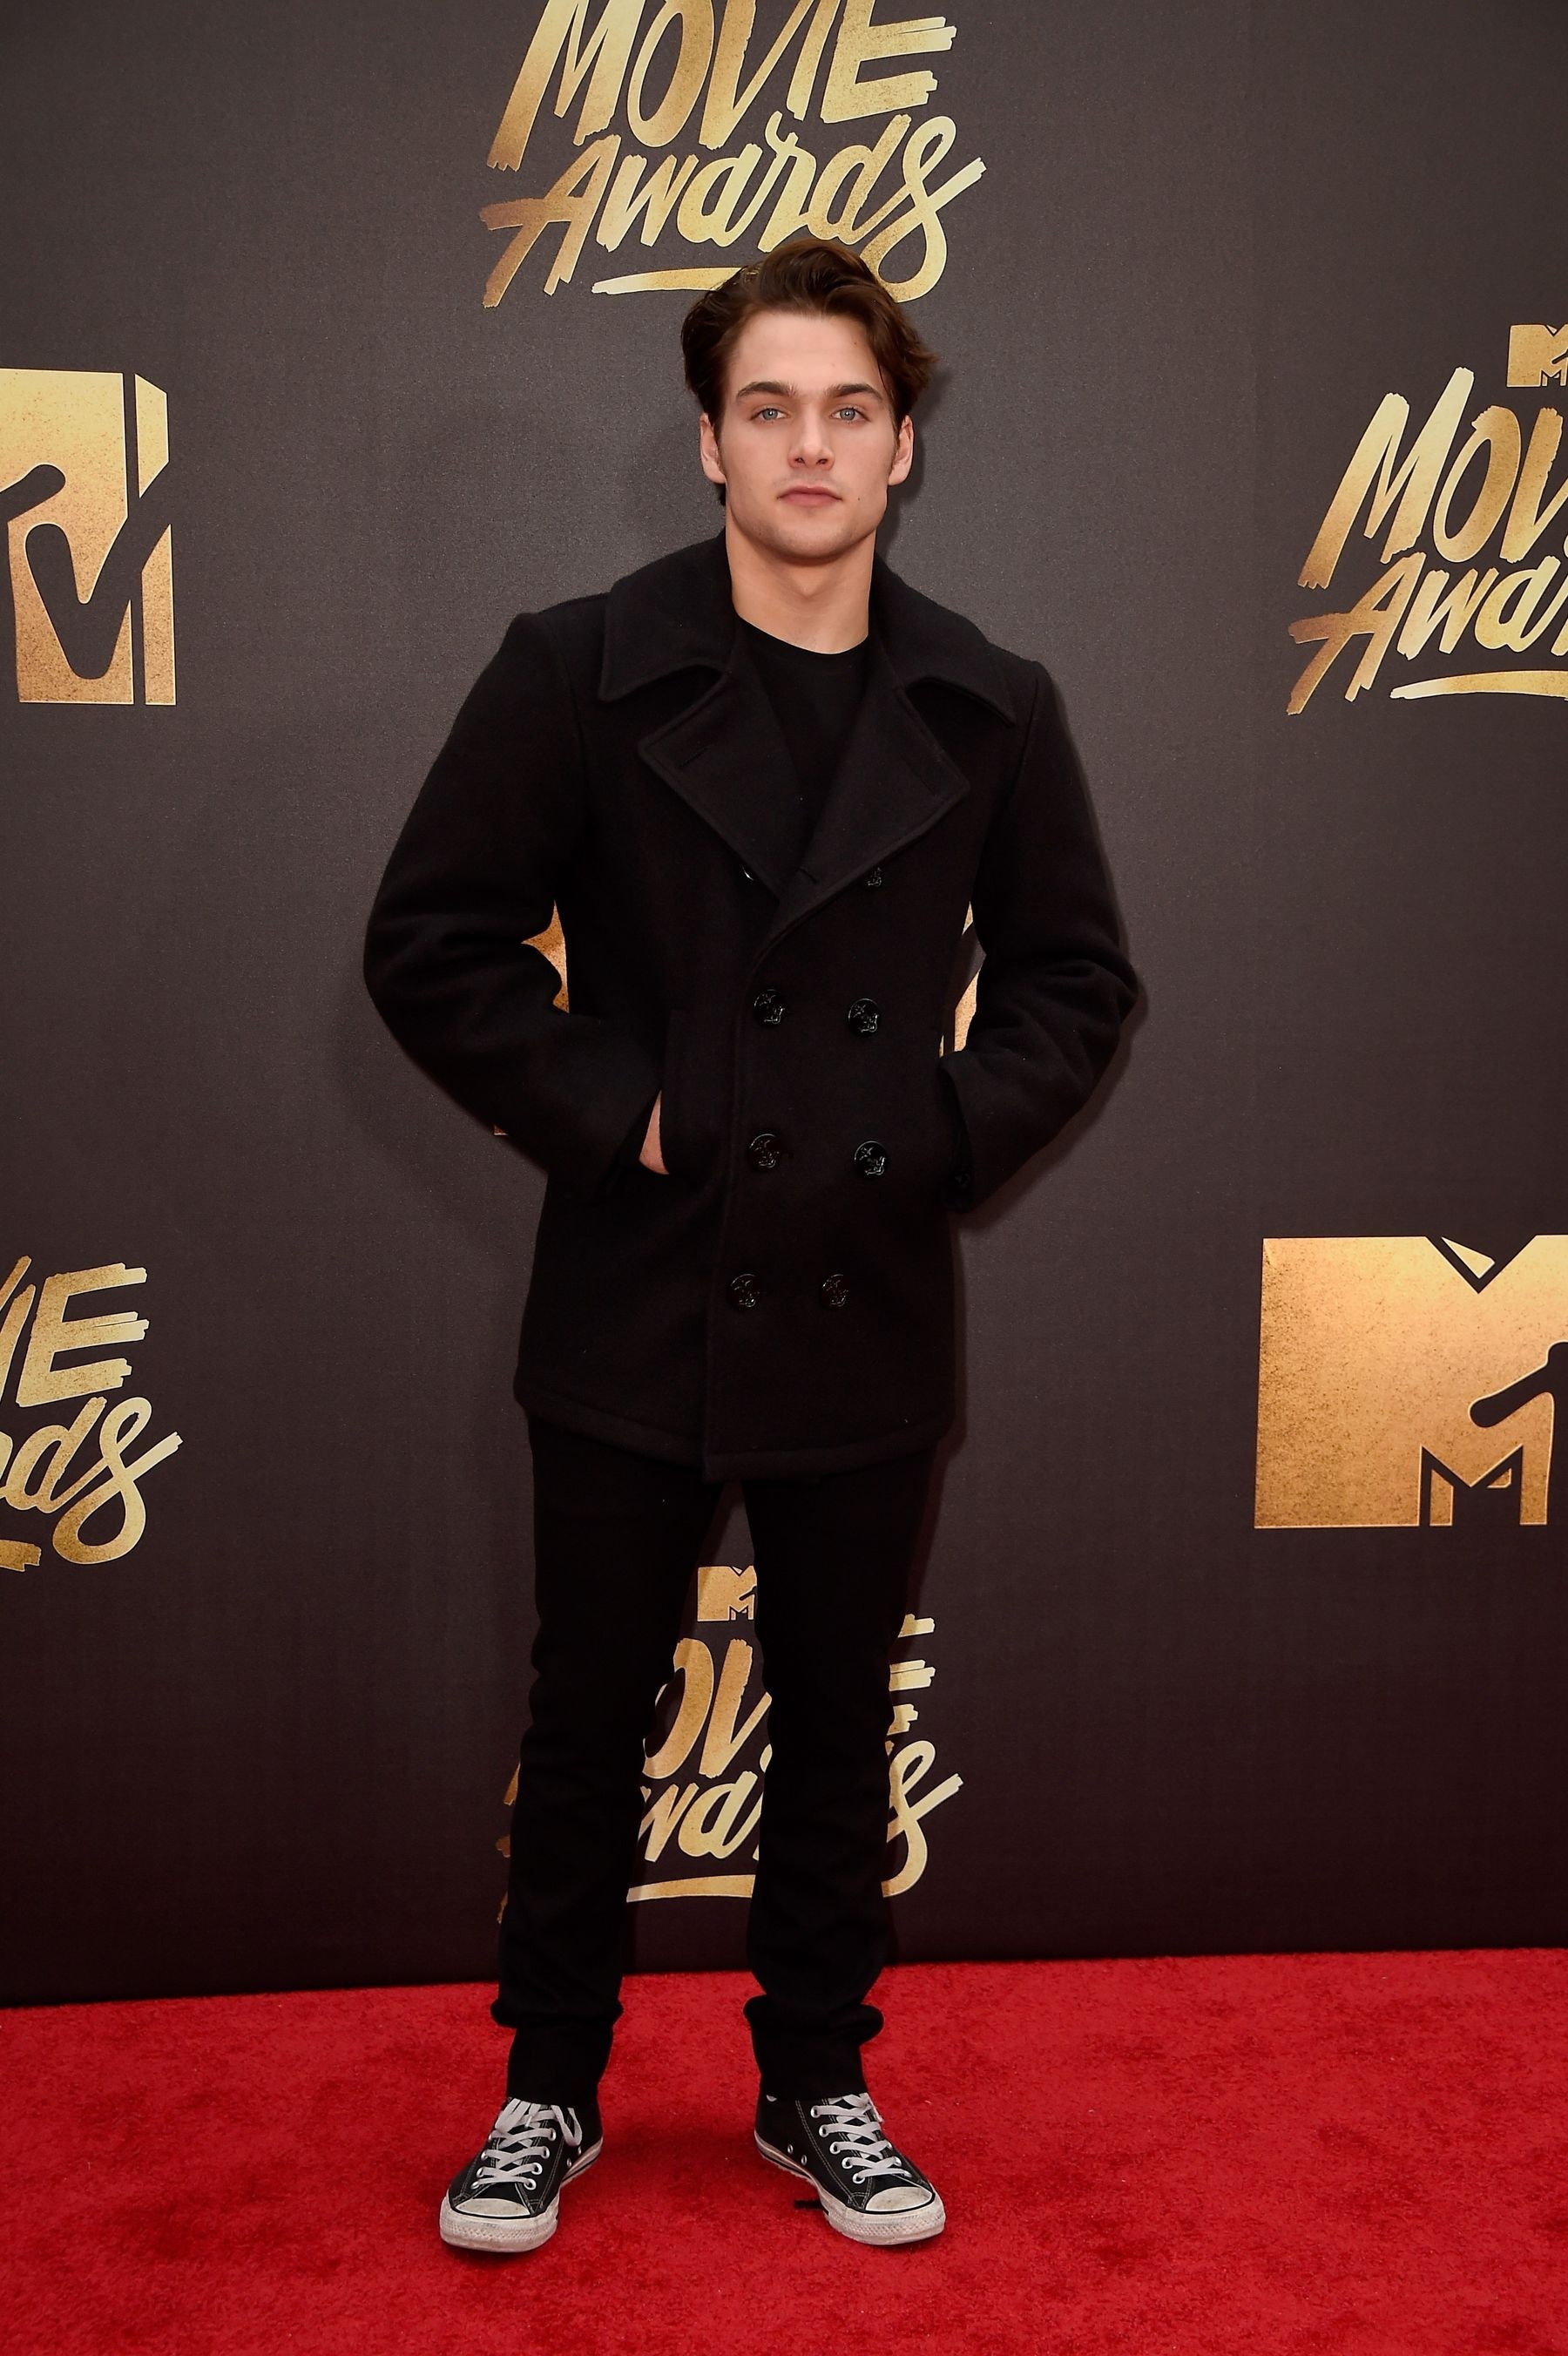 Team players mtv, stars represented movie, awards red carpet, movie awards dylan, 1800x2710 HD Handy